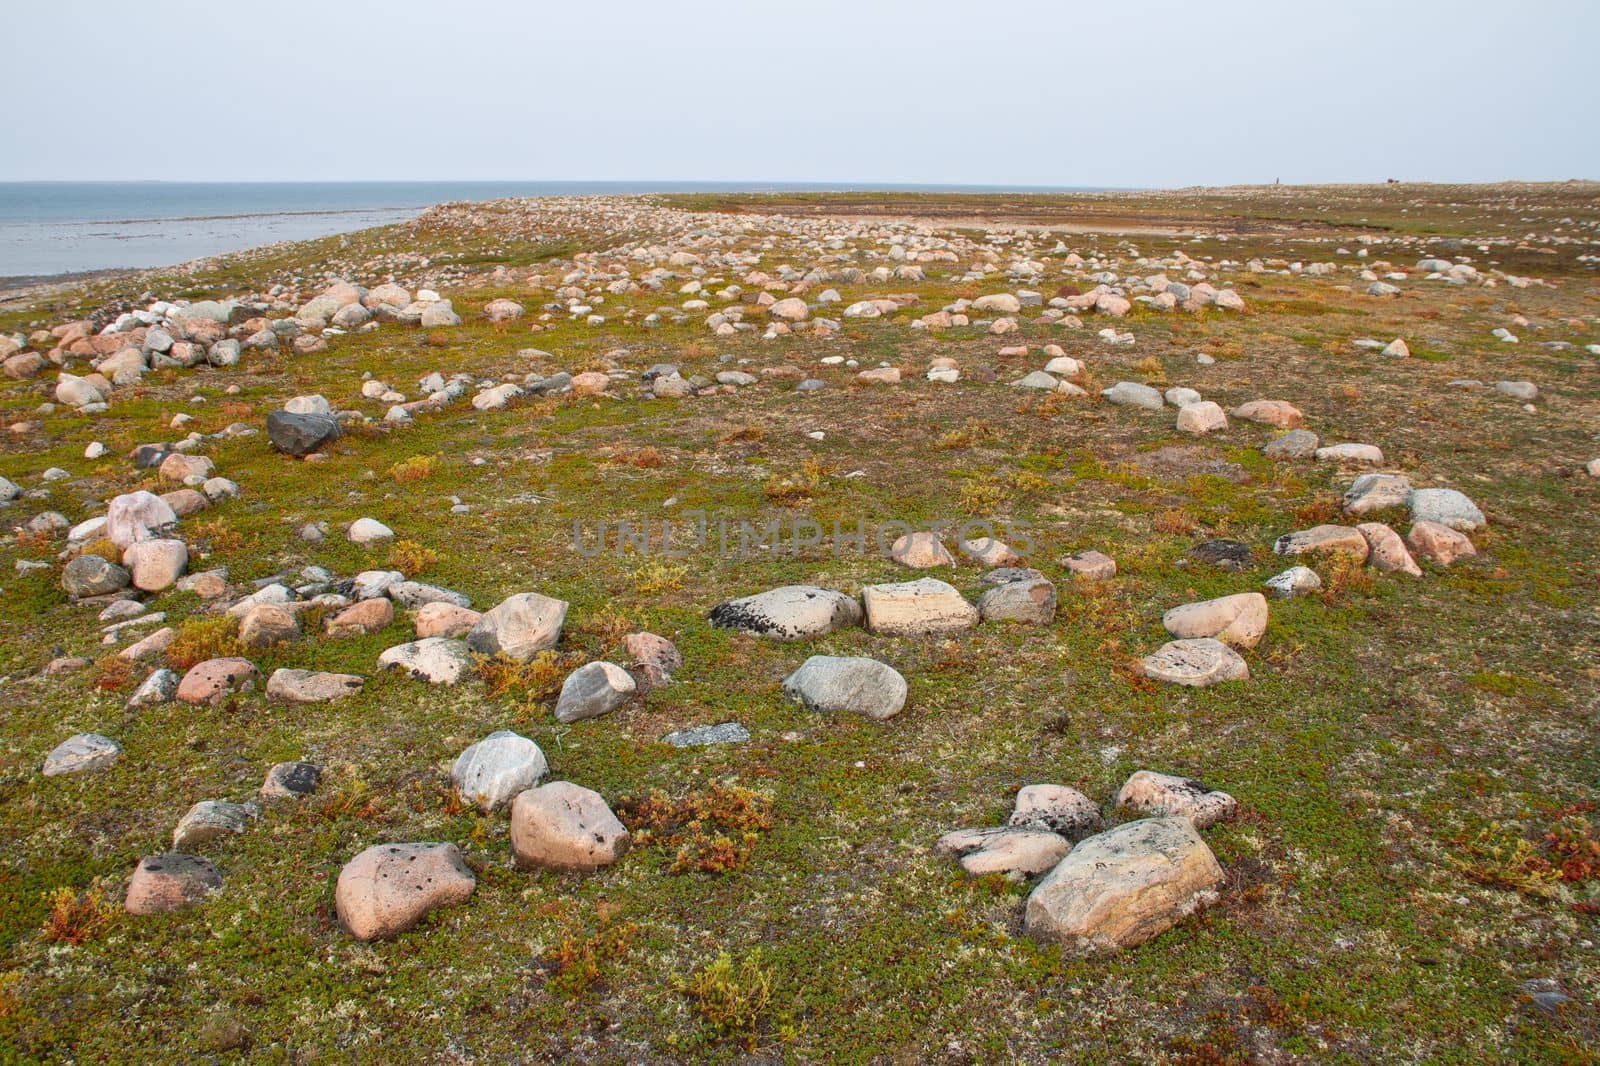 Remains of Inuit tent ring along the coast of Hudson Bay north of Arviat at a place called Qikiqtarjuq, Nunavut, Canada